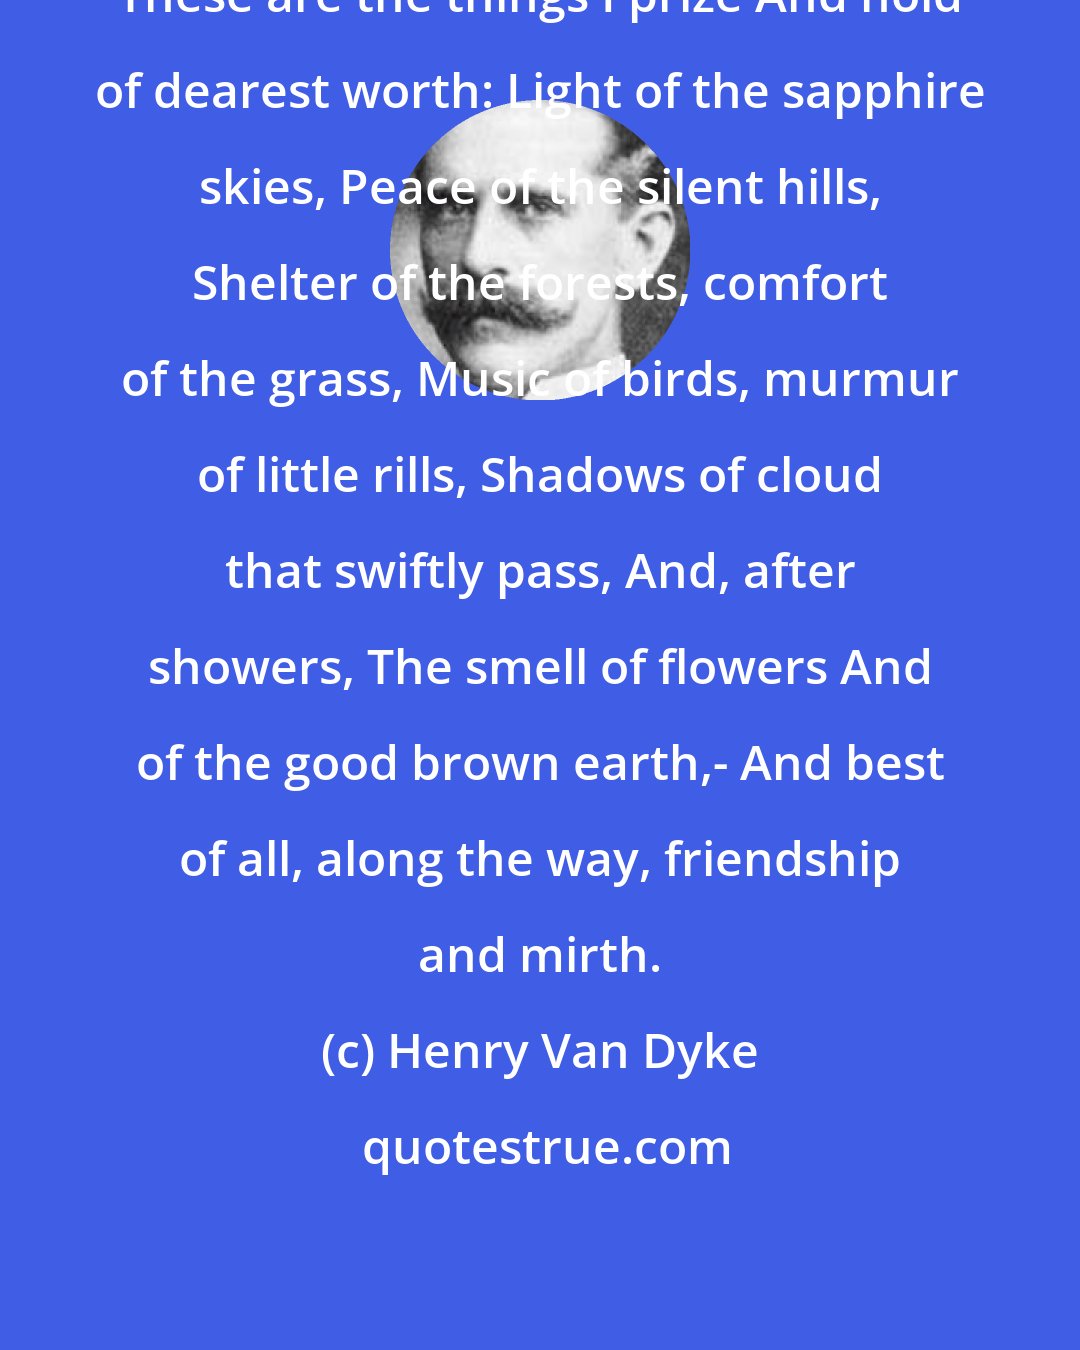 Henry Van Dyke: These are the things I prize And hold of dearest worth: Light of the sapphire skies, Peace of the silent hills, Shelter of the forests, comfort of the grass, Music of birds, murmur of little rills, Shadows of cloud that swiftly pass, And, after showers, The smell of flowers And of the good brown earth,- And best of all, along the way, friendship and mirth.